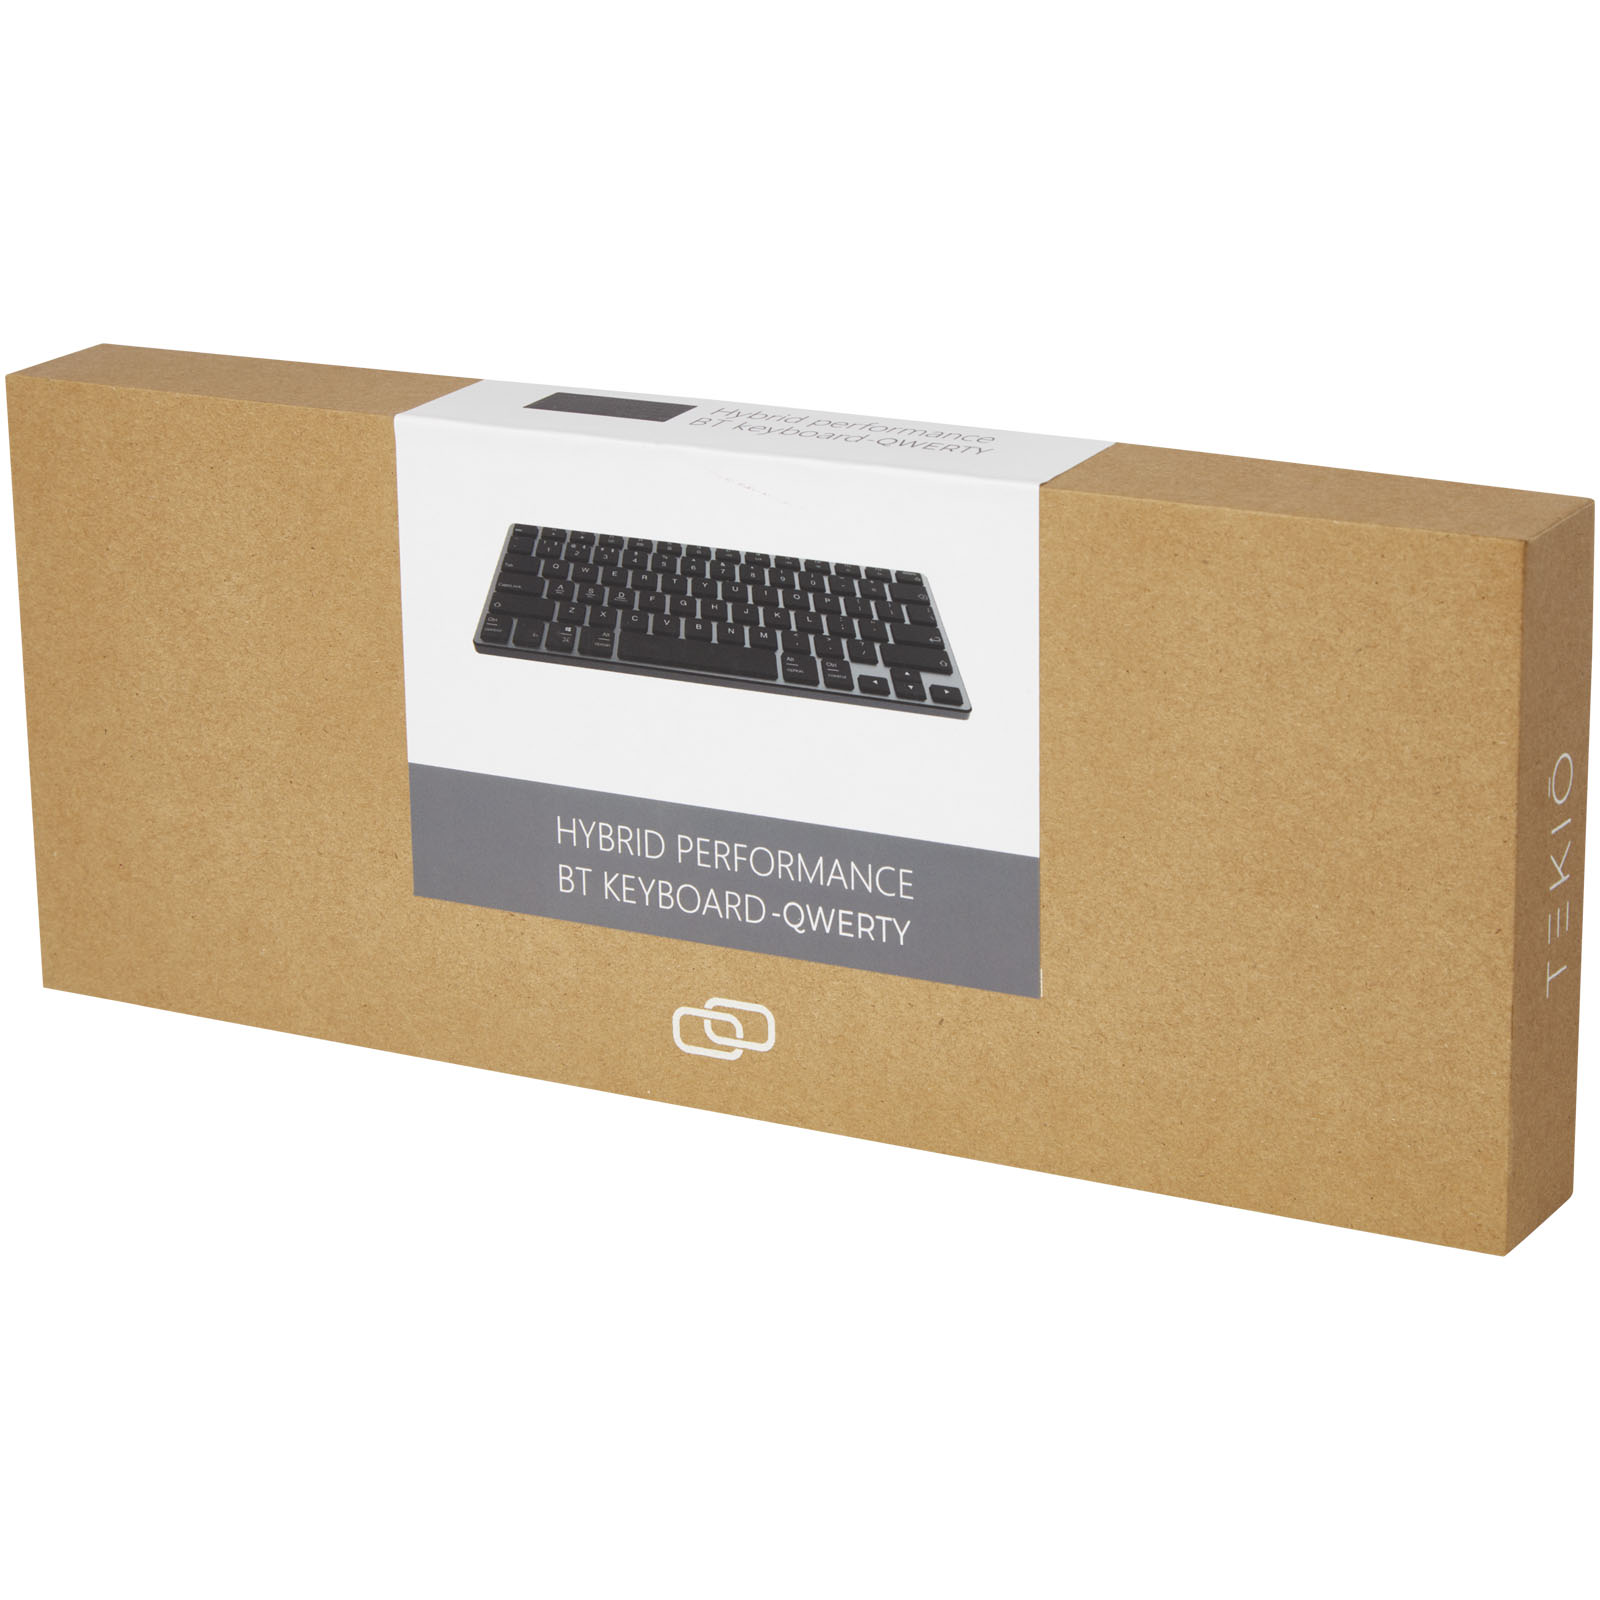 Advertising Computer Accessories - Hybrid performance Bluetooth keyboard - QWERTY - 1